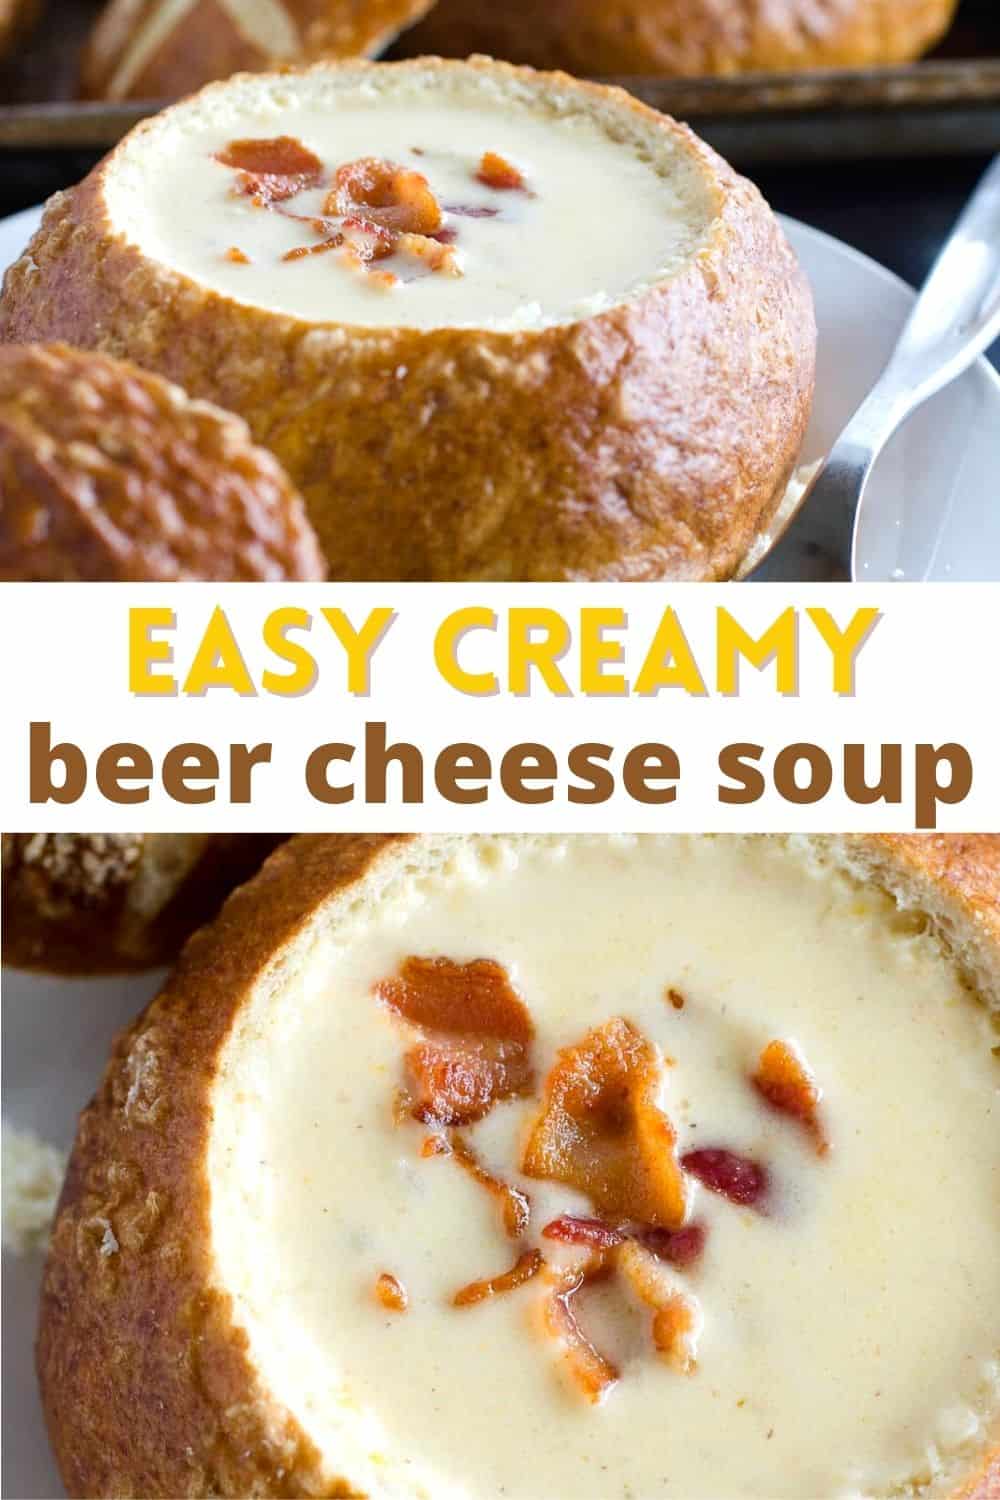 Beer cheese soup is creamy comfort food in a bowl! This recipe is super easy and cooked in just one pot.